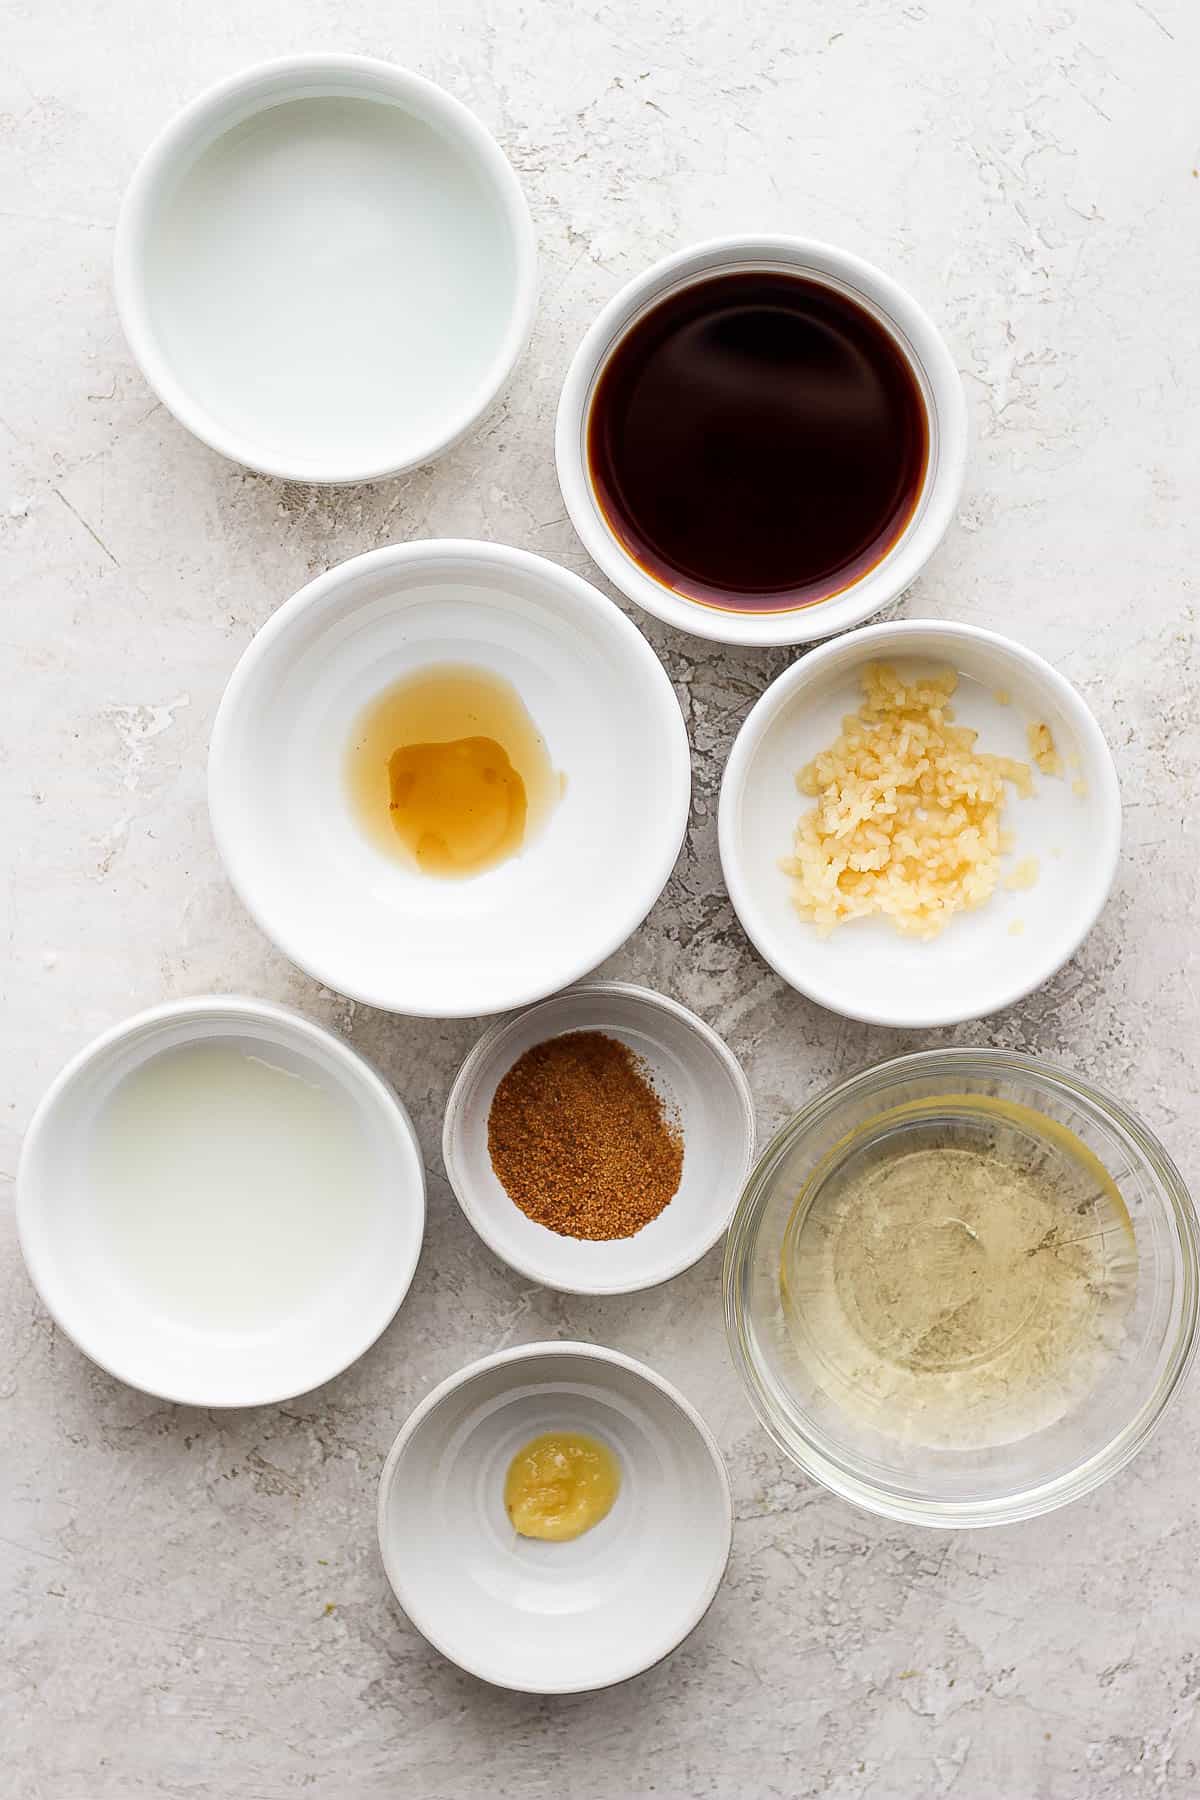 Ingredients for the sesame ginger dressing in separate bowls.